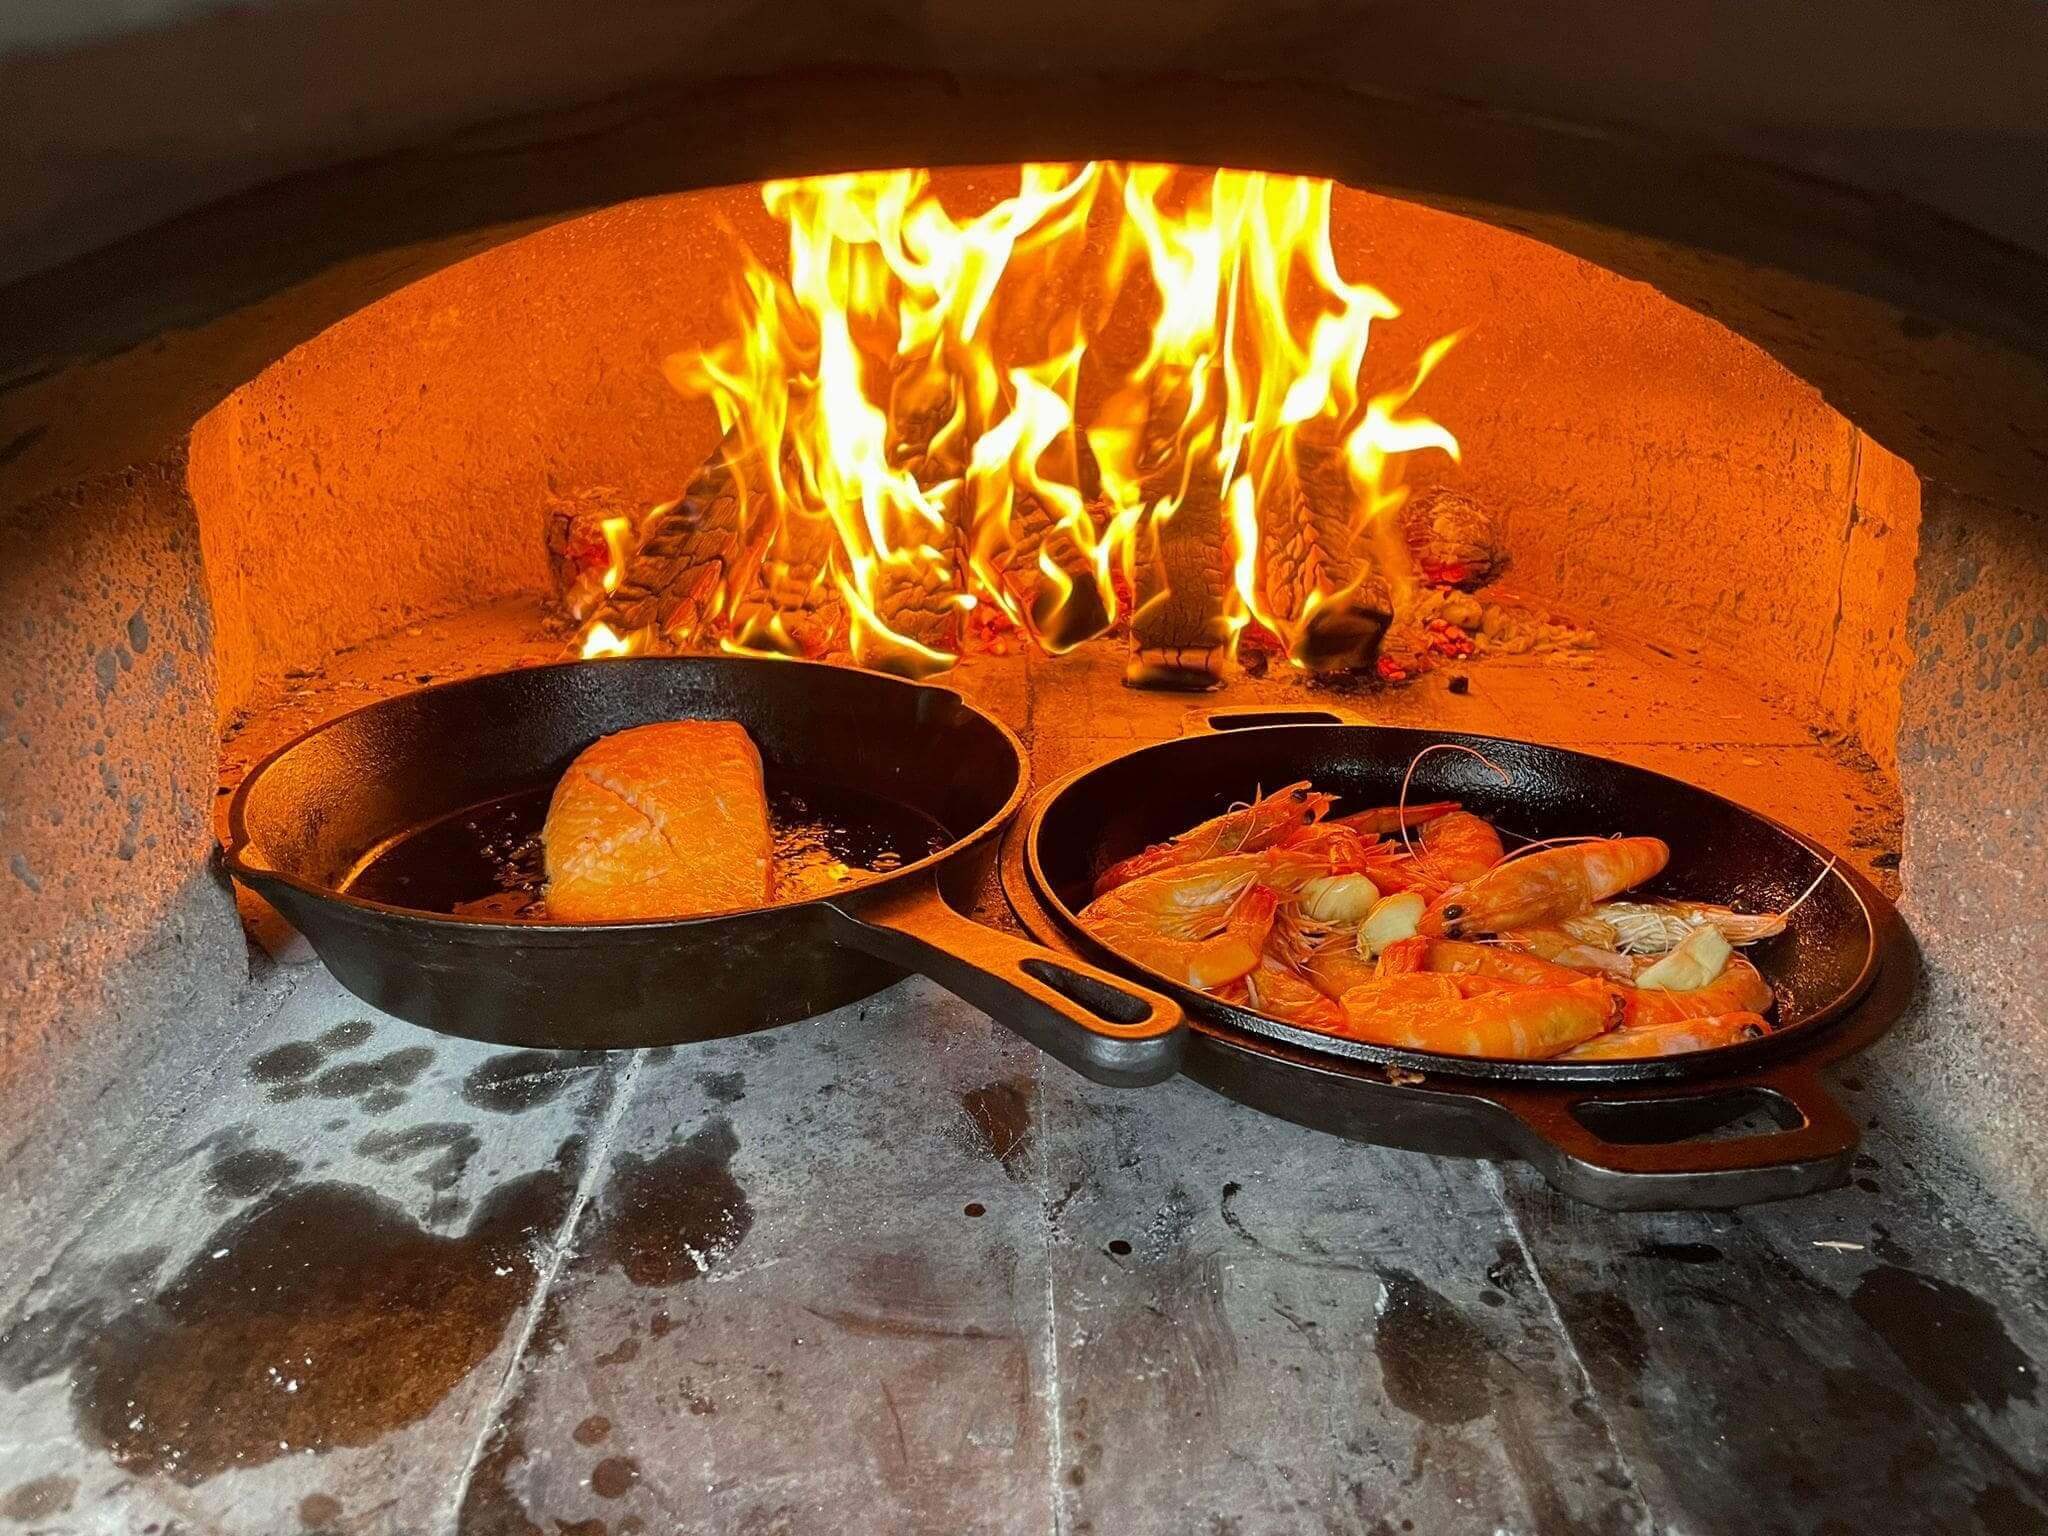 A seafood platter being cooked in a pizza oven which is perfectly